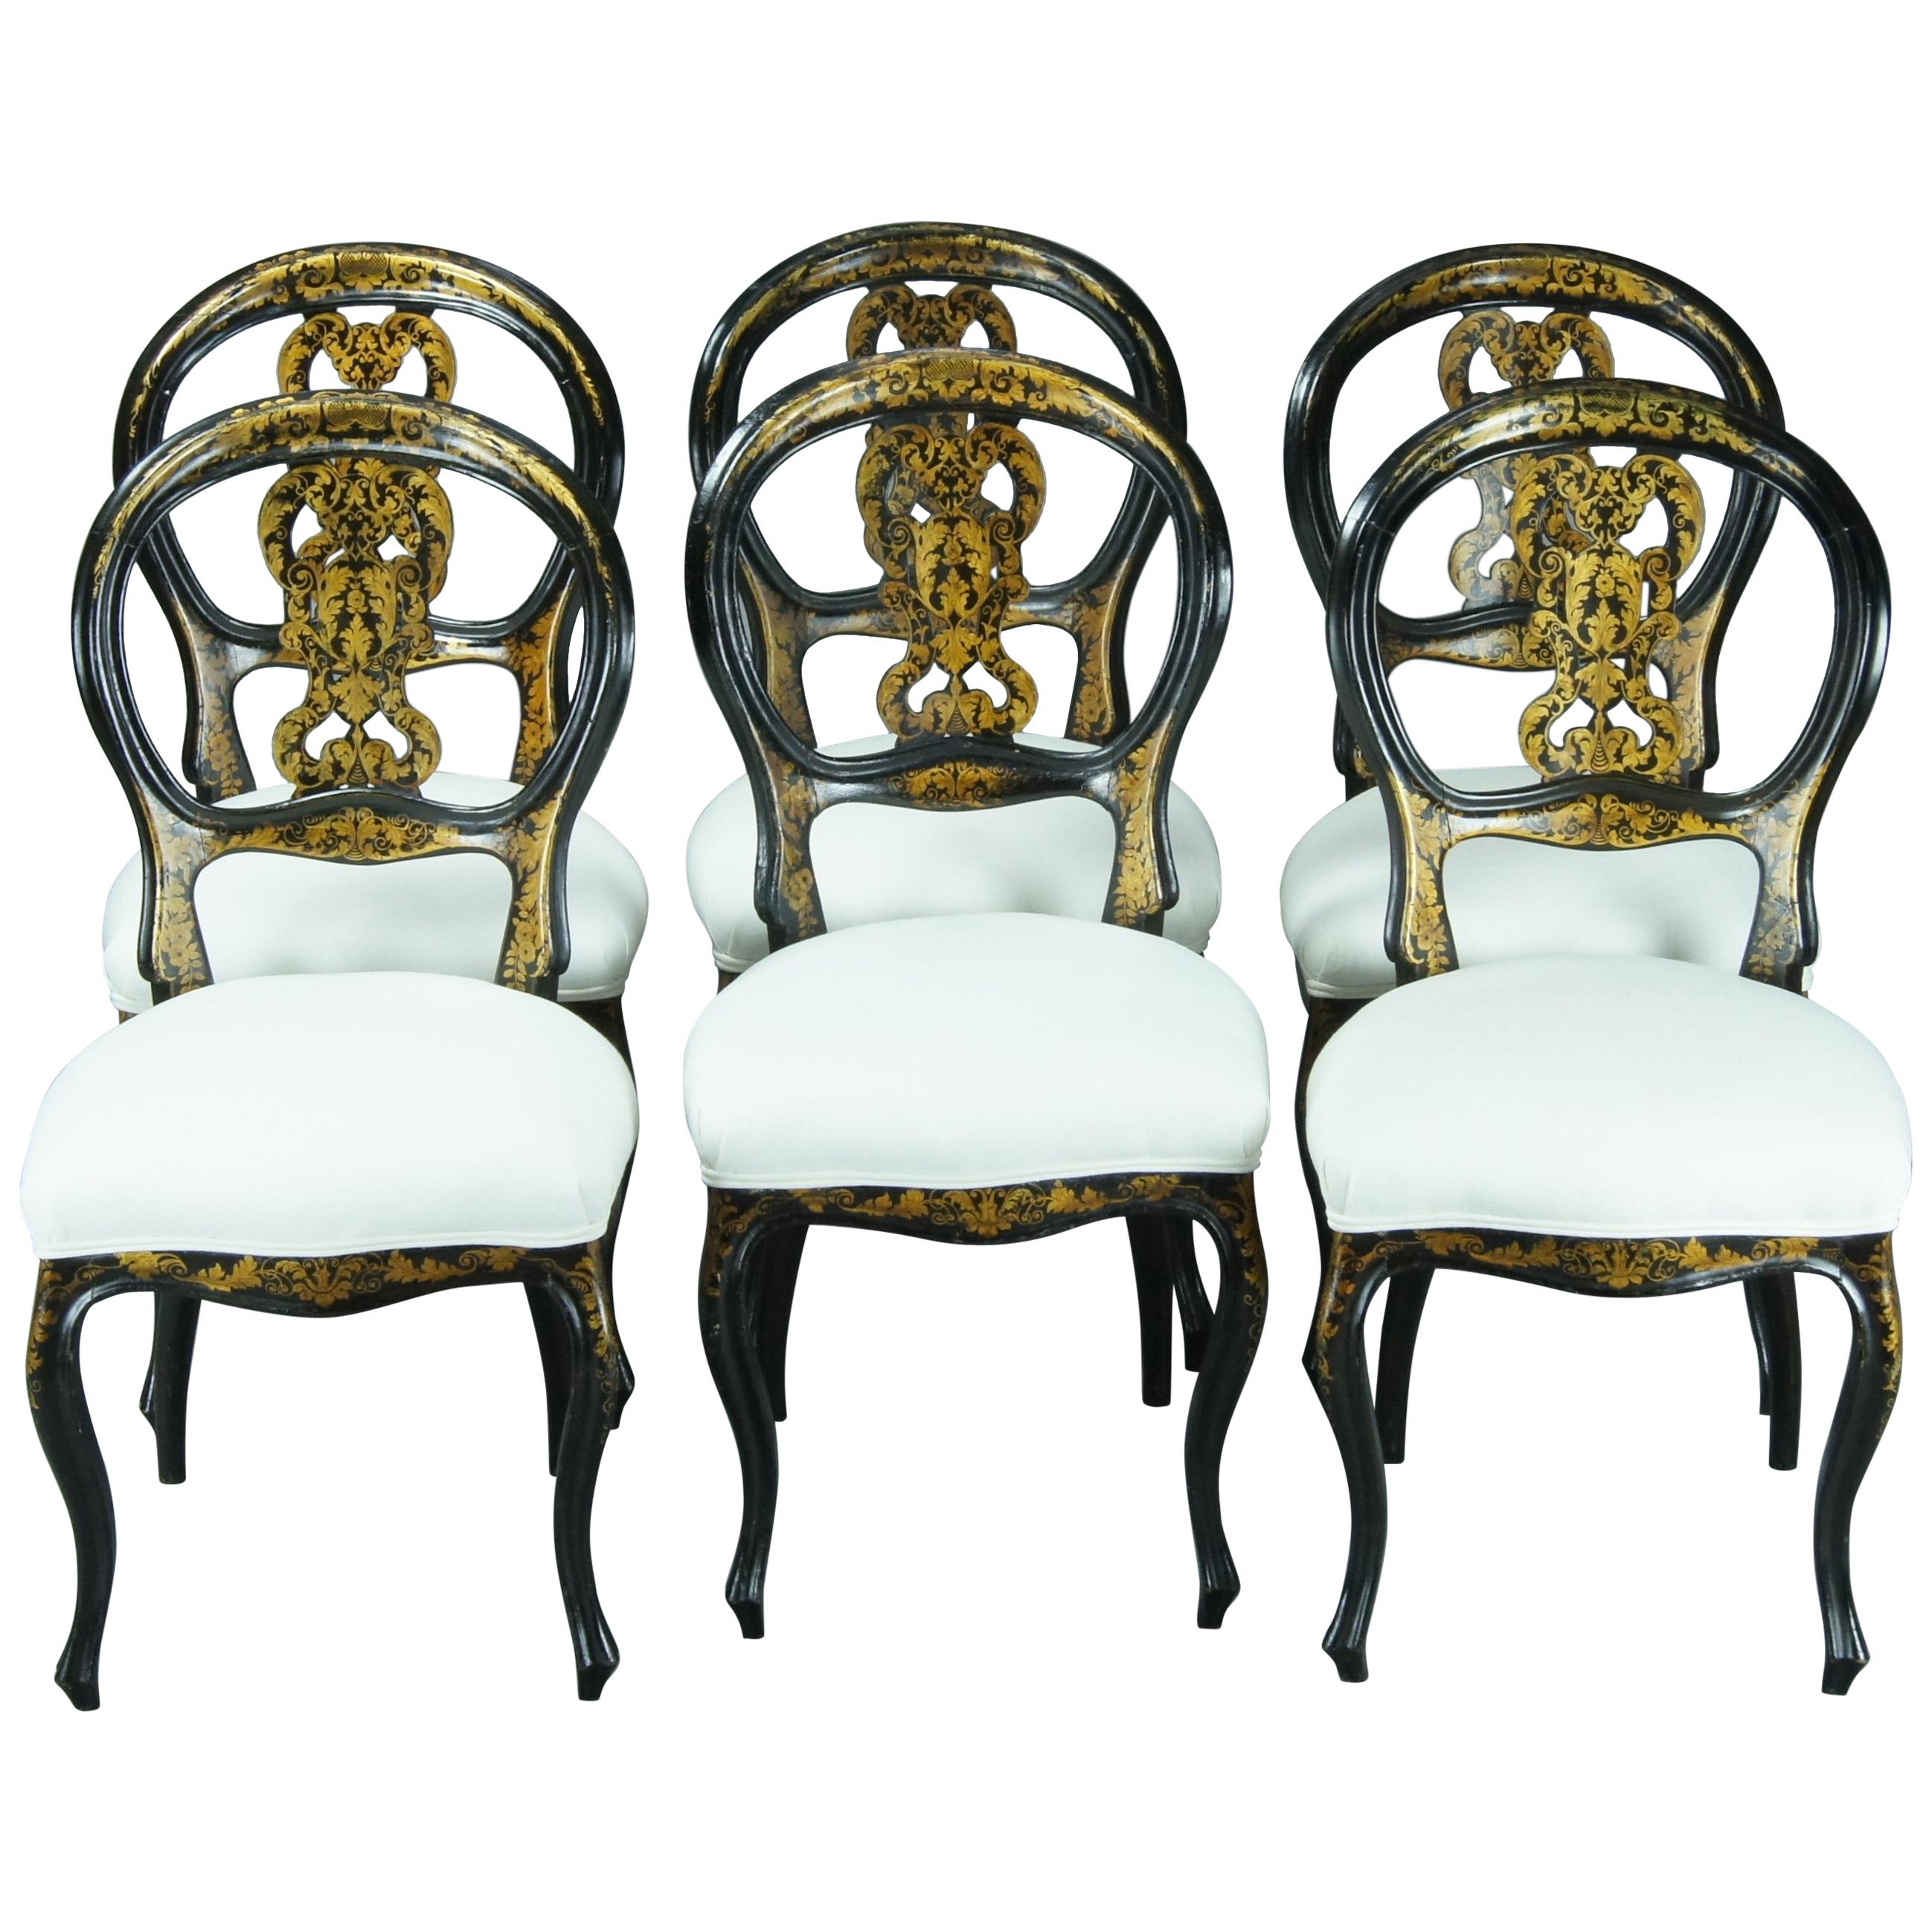 Set of Six English Black Lacquer Dining Chairs